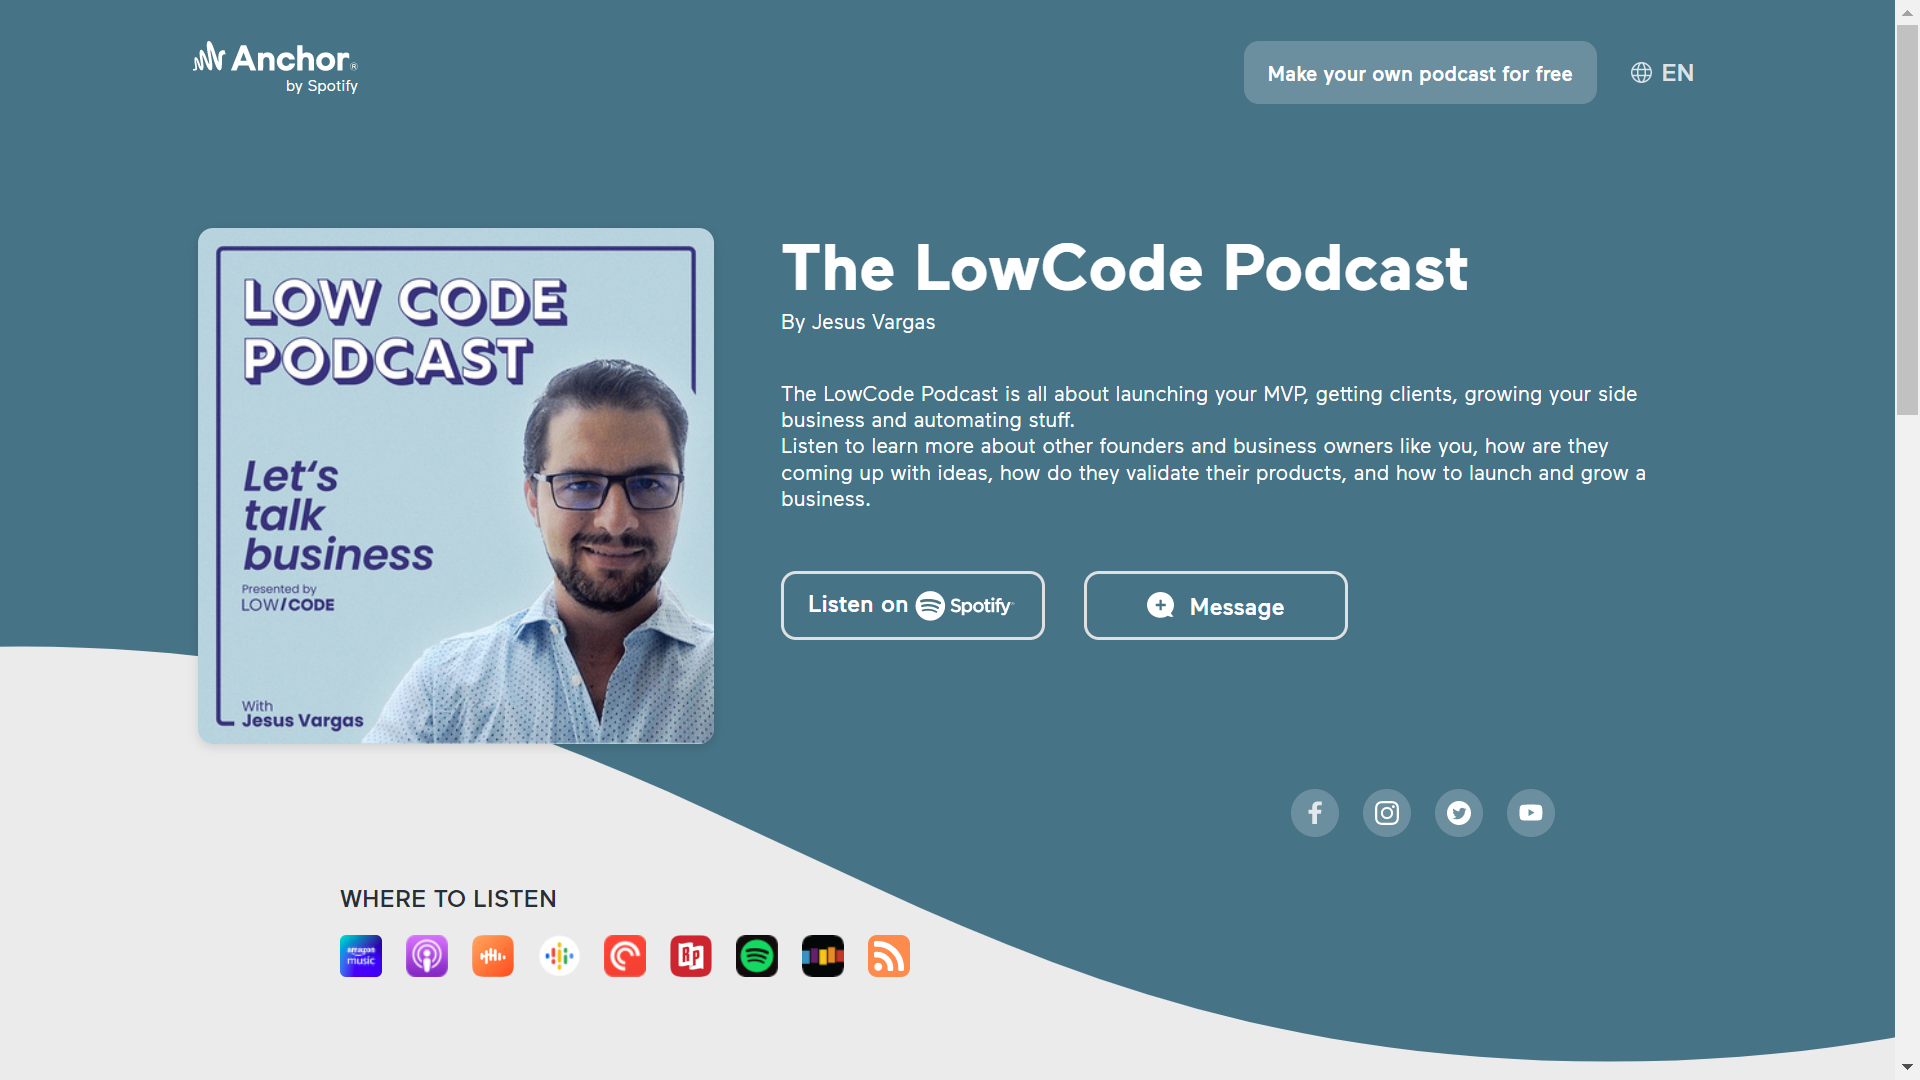 The LowCode Podcast